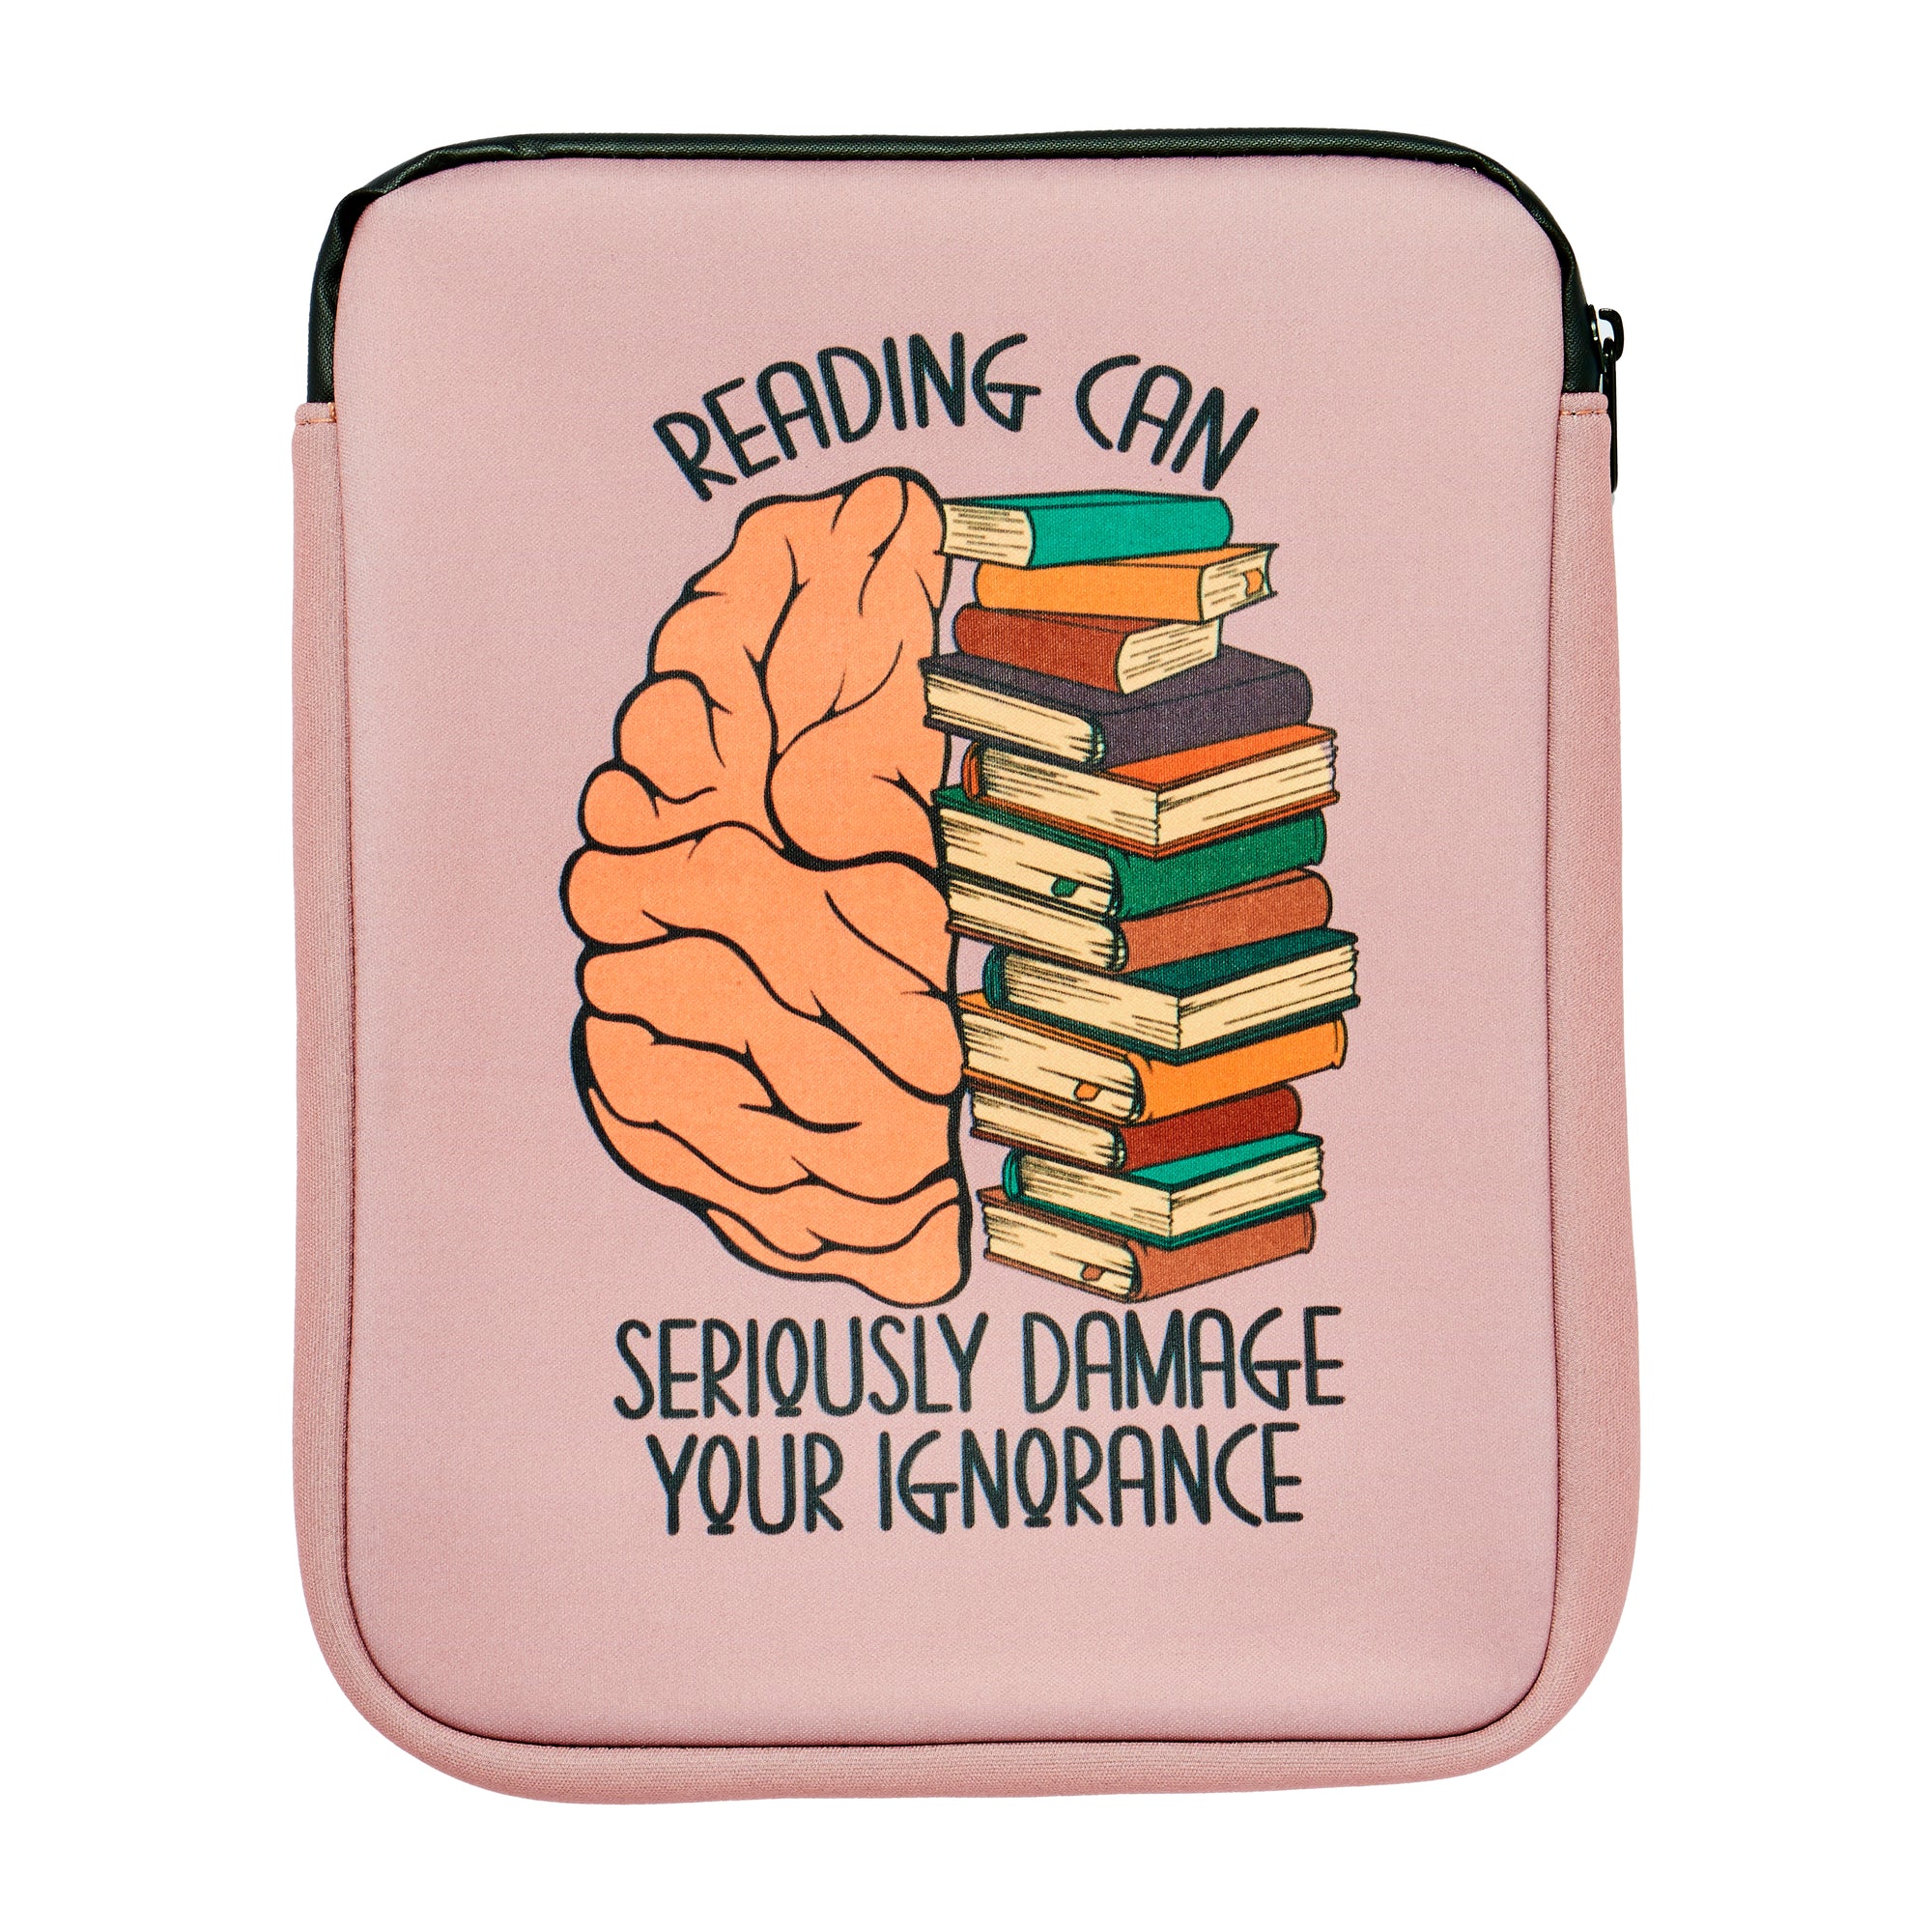 Book Pouch Bibliophilerreading can damage your ignorance. book lovers gifts book quotes book sleeves book protection 